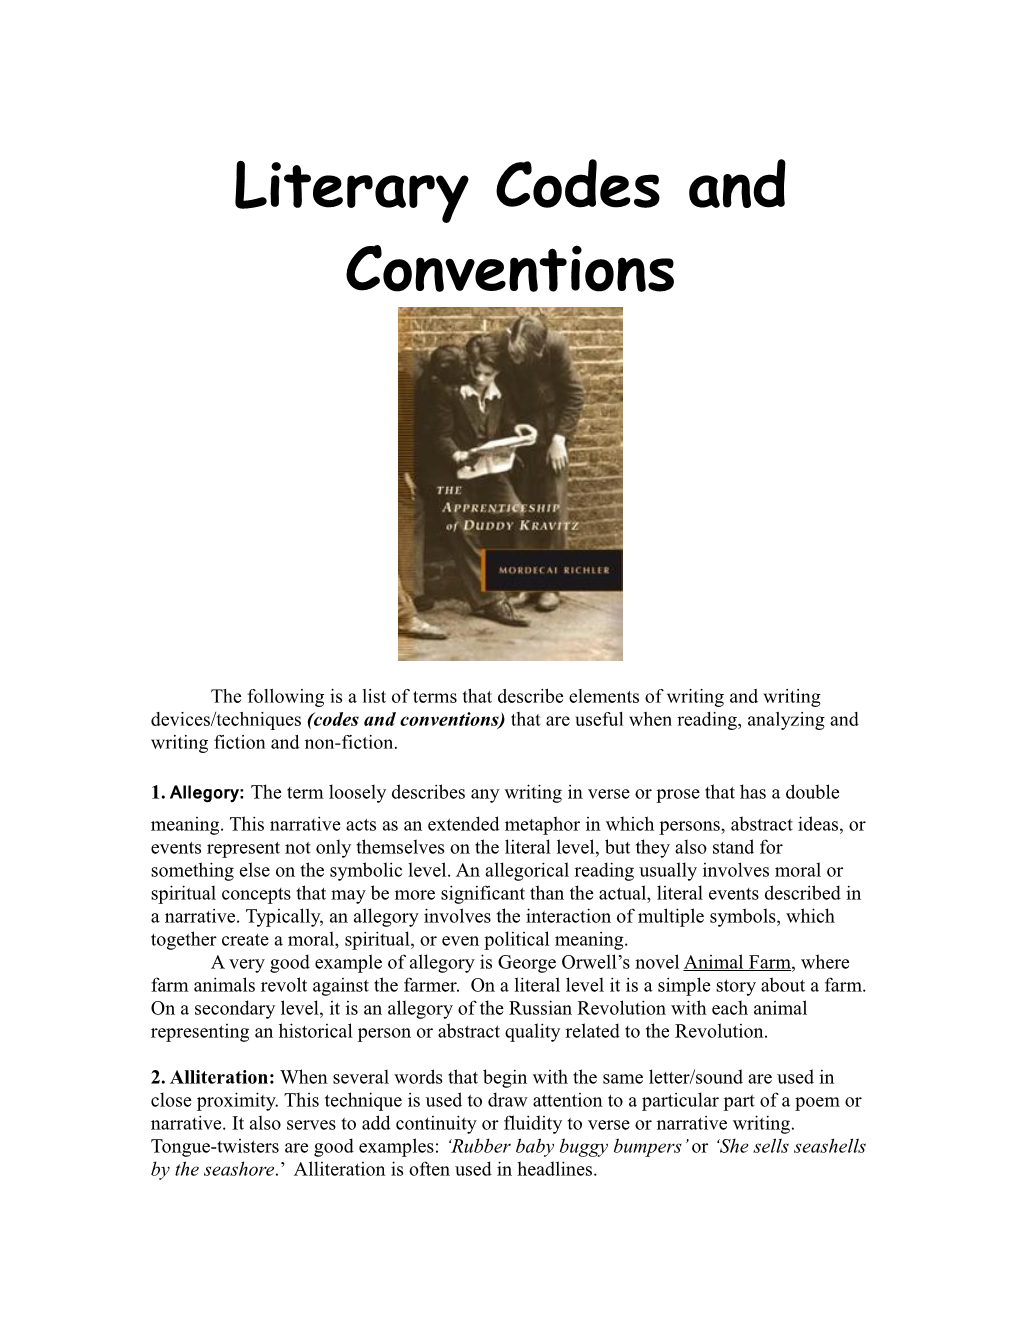 Literary Codes and Conventions